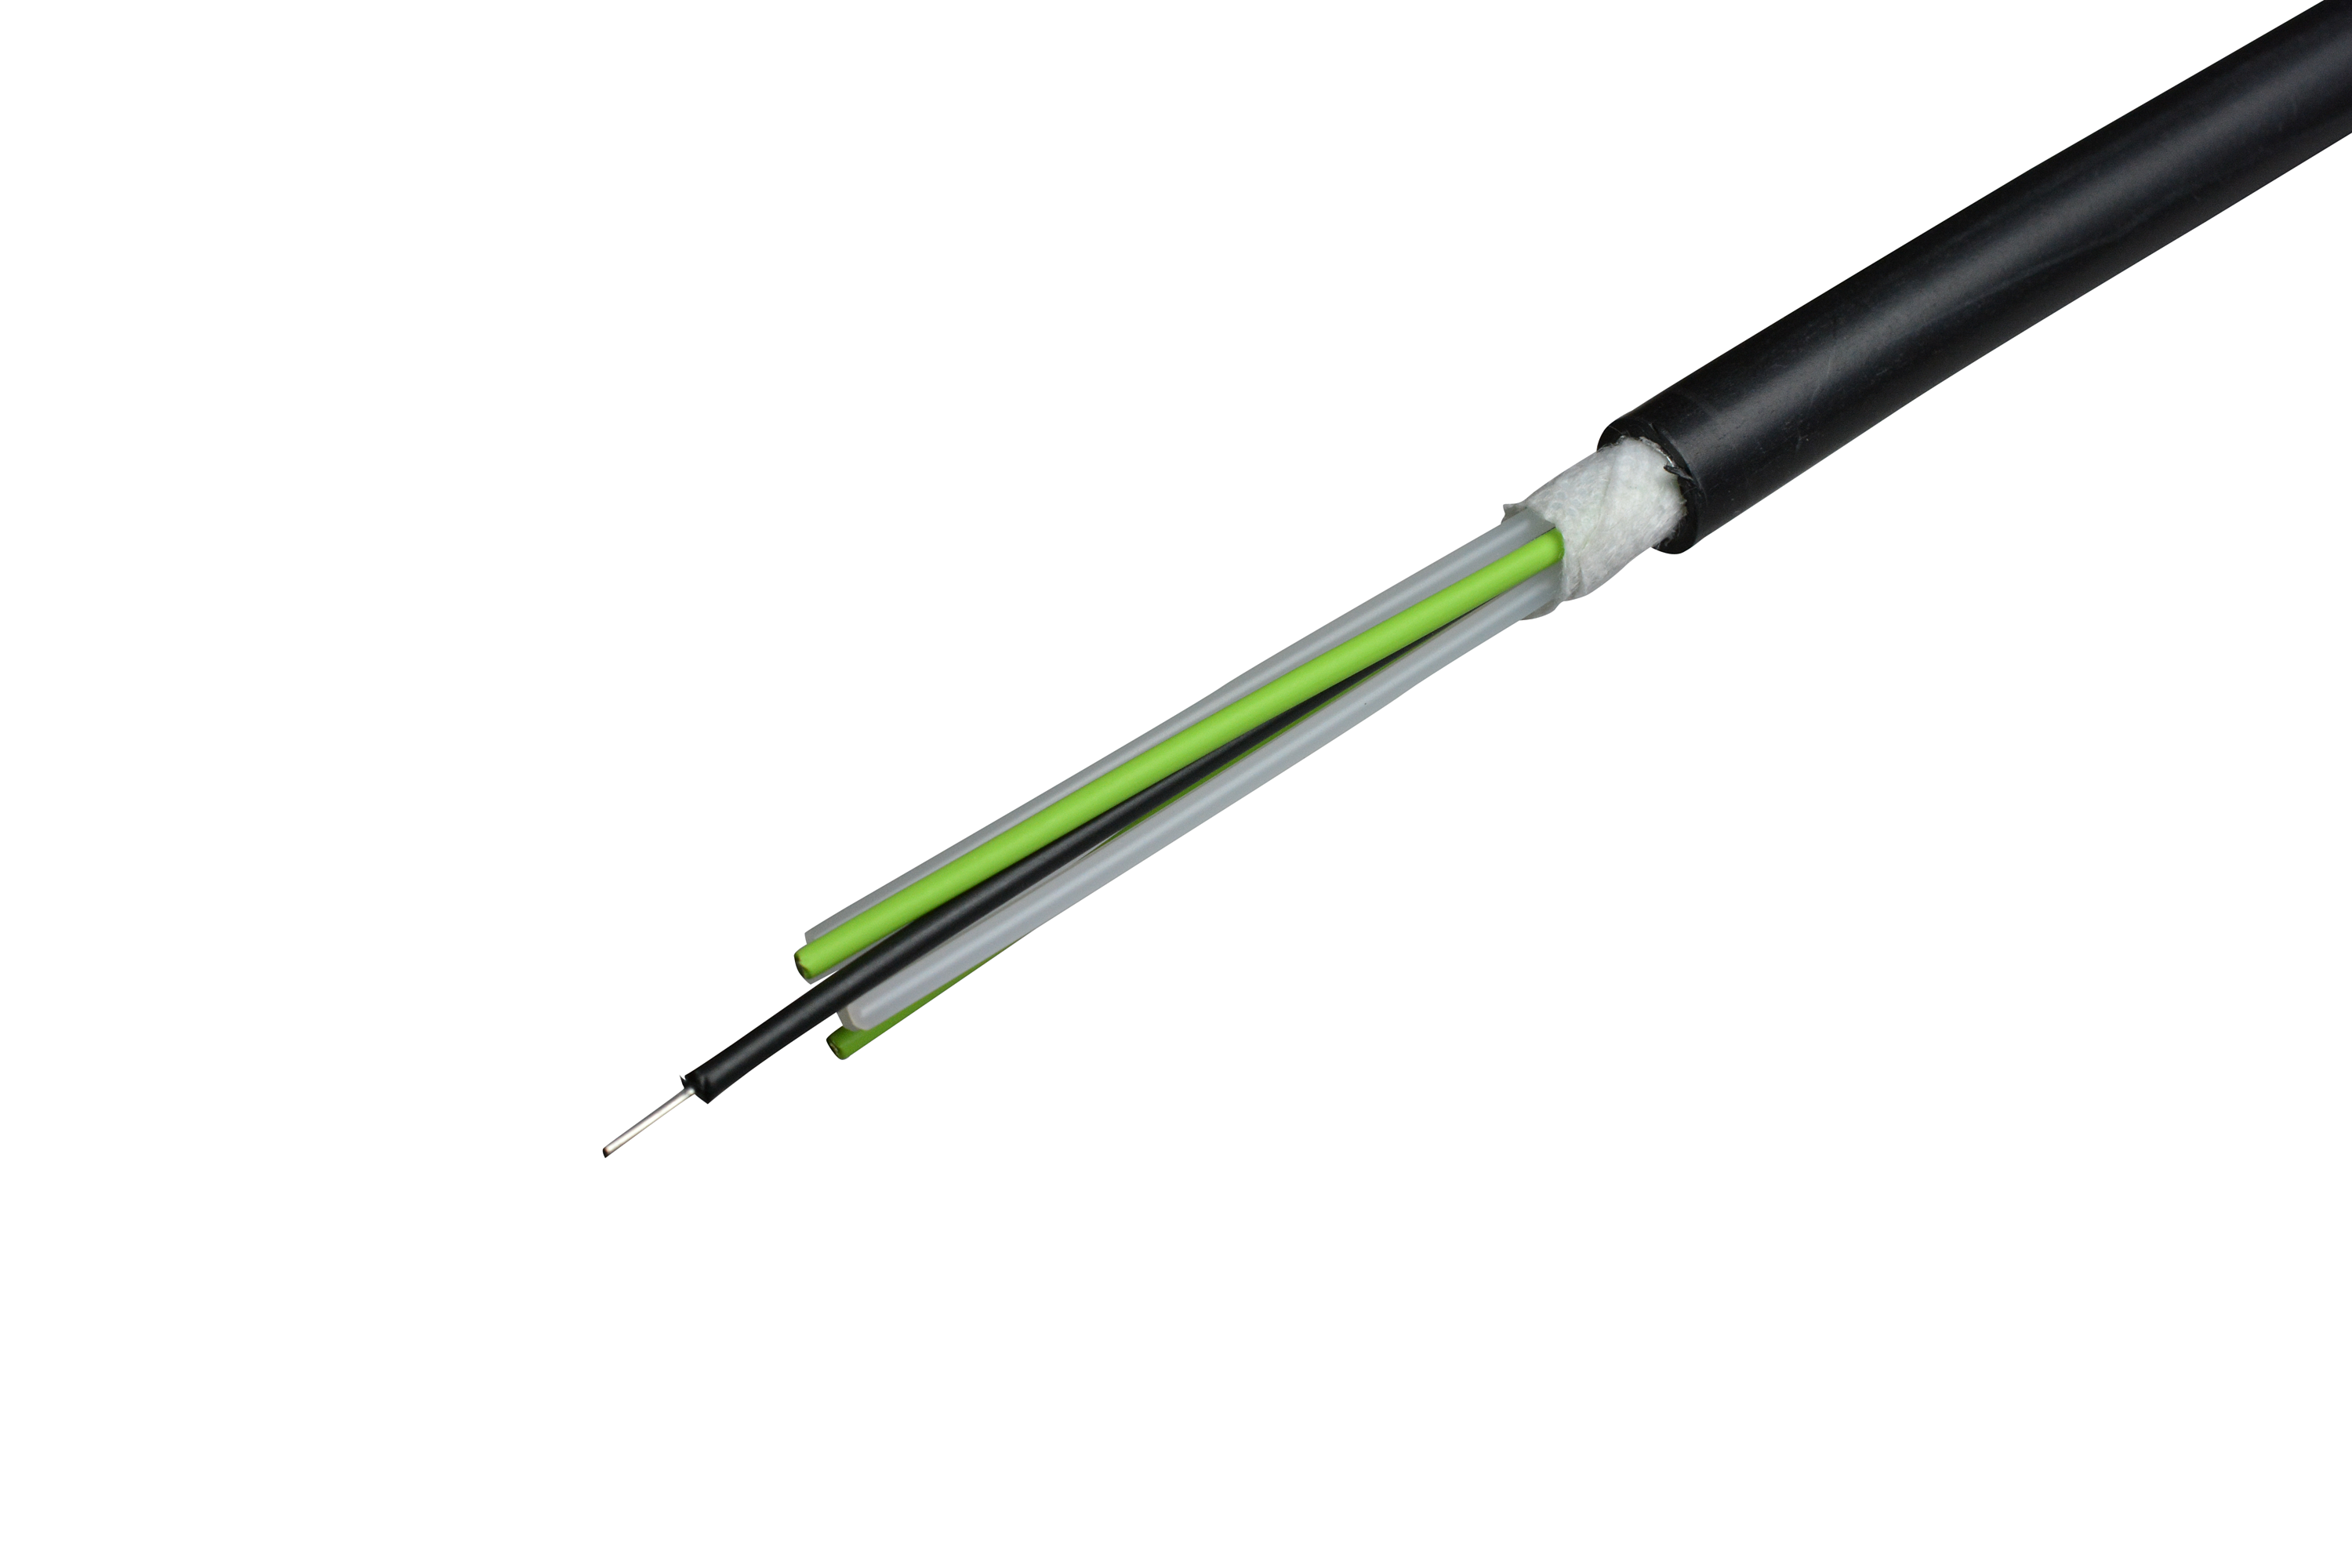 6cores,OS2,Unitized Round Type Fiber Optic Cable for Indoor and OutdoorUse.